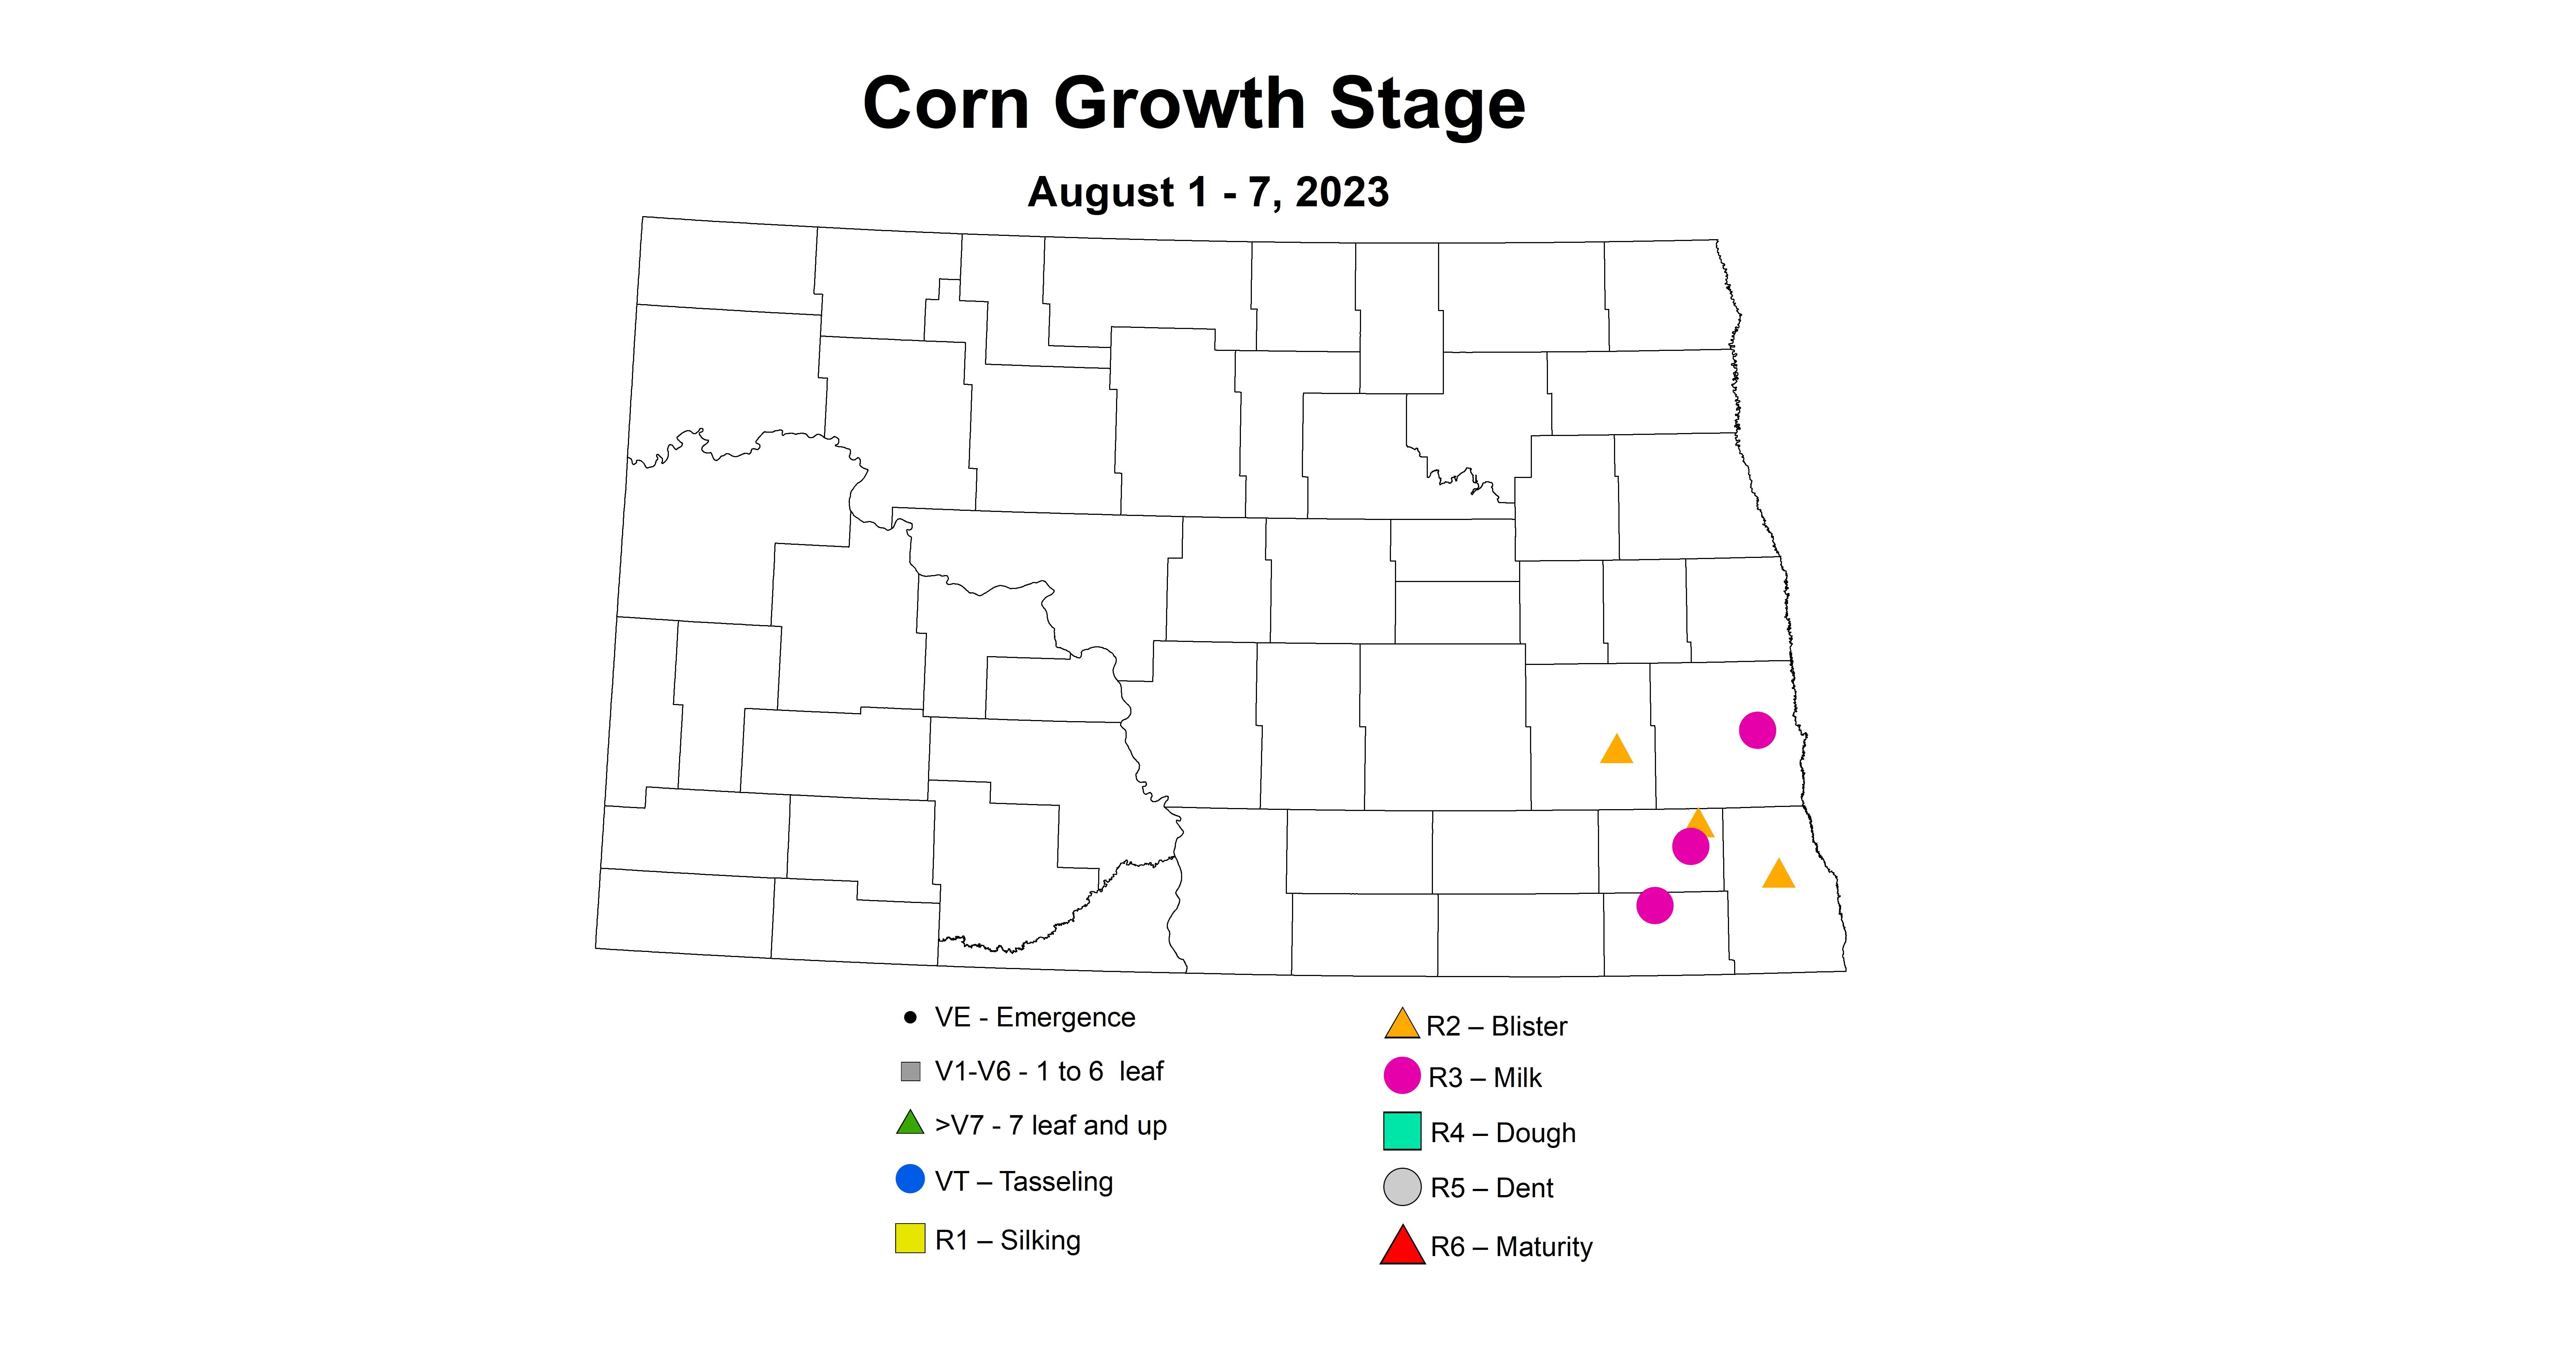 corn growth stage 8.1-8.7 2023